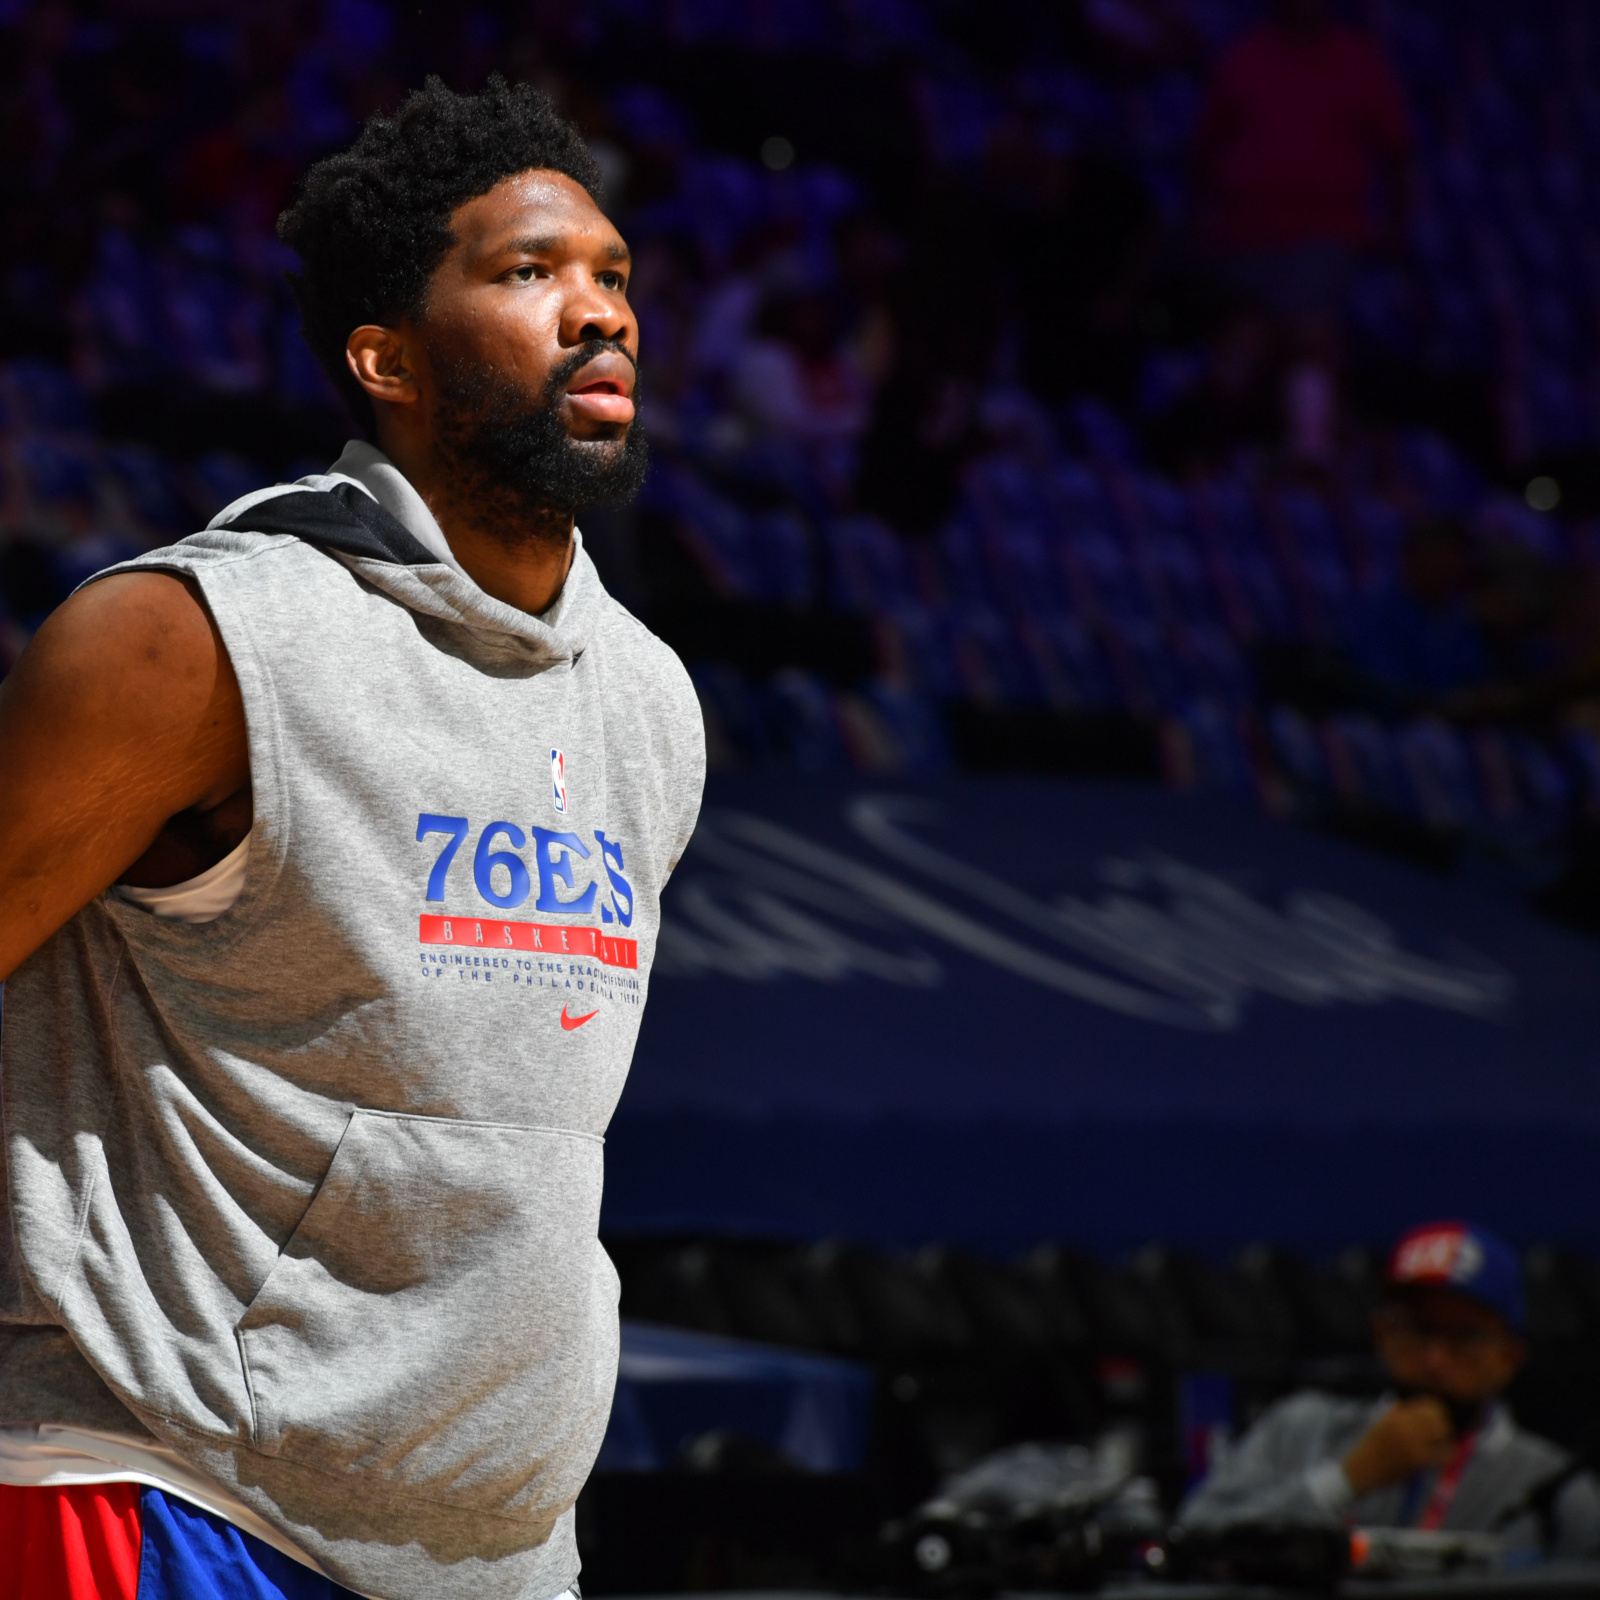 Former Jayhawk Joel Embiid's runner-up finish in 2022 MVP voting no snub  nor an indication of his place in the game - KU Sports